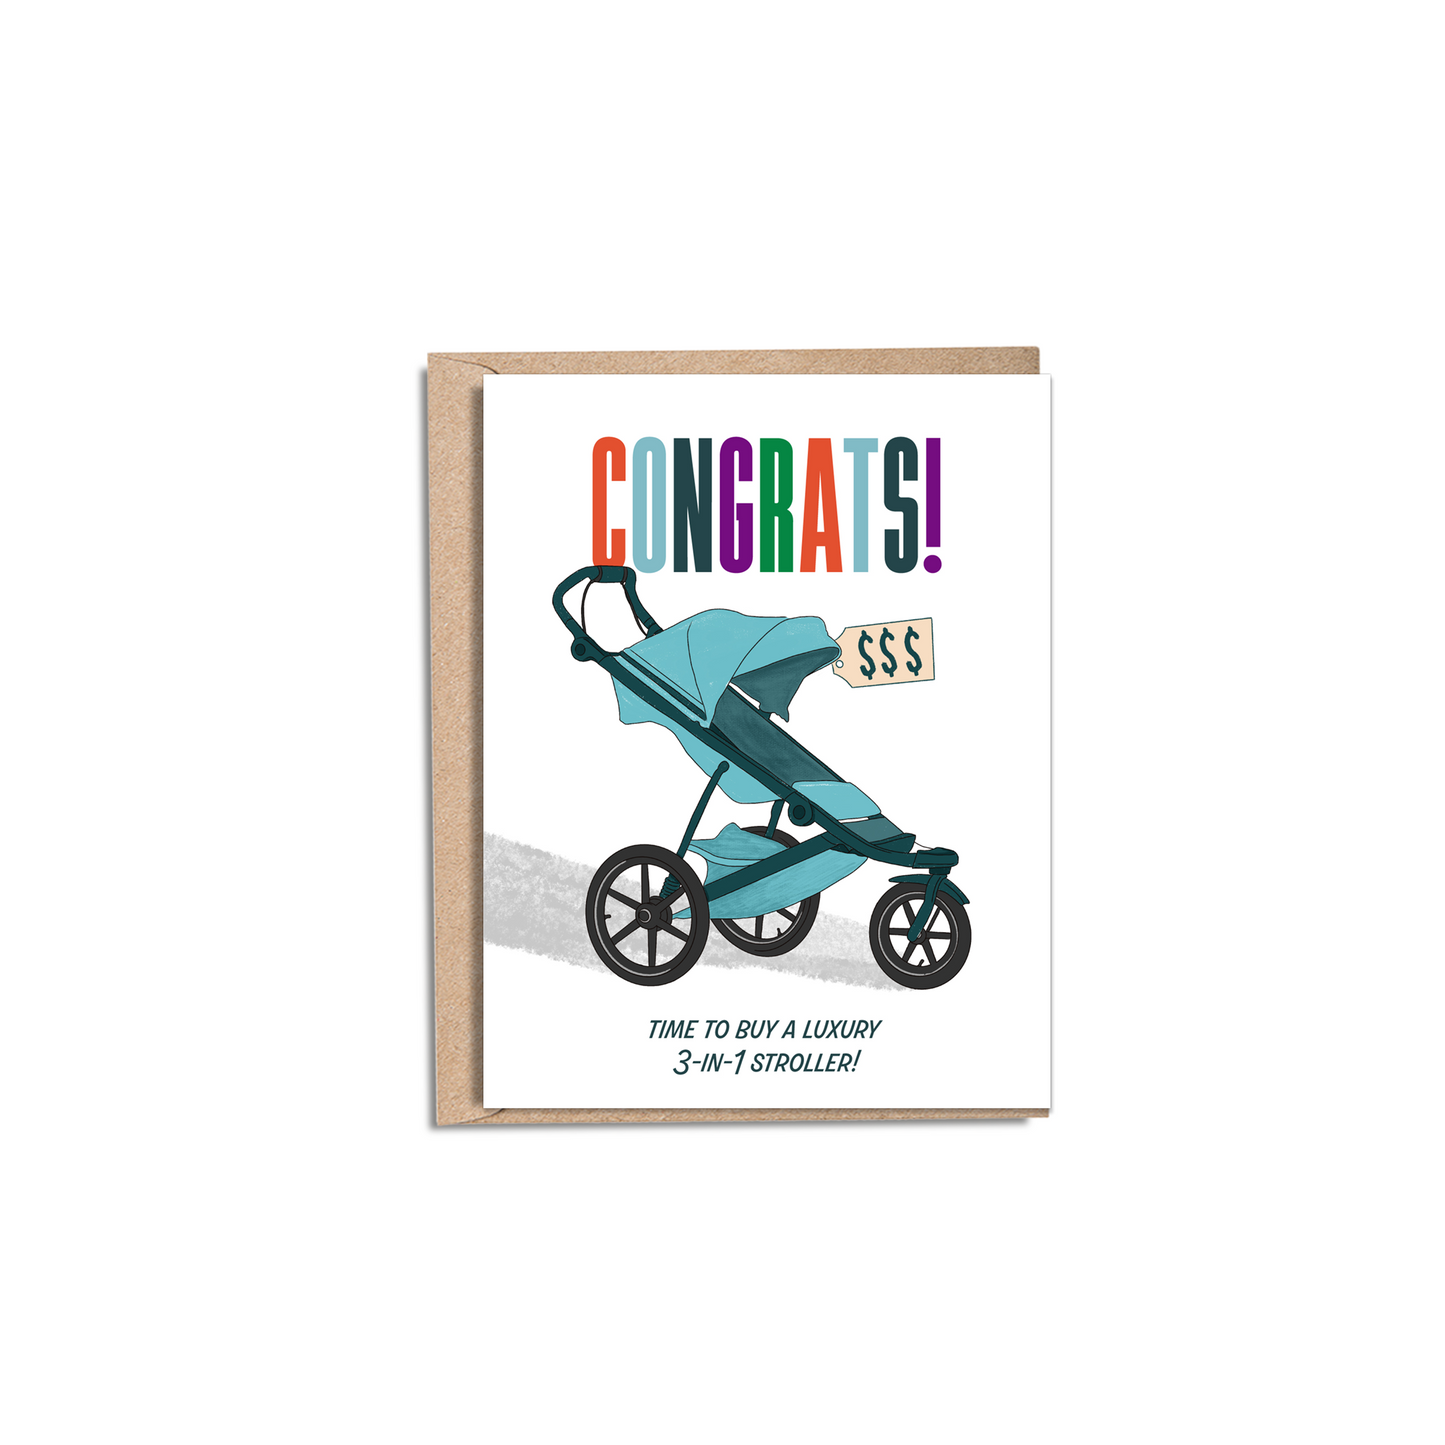 "4.25 x 5.5” A2 sized card with an illustration of a blue luxury modern stroller. The illustrated baby carriage is the perfect card for expecting parents. The text on the card reads ‘Congrats’ in various colors. The inside of the card is blank. Envelope included. "